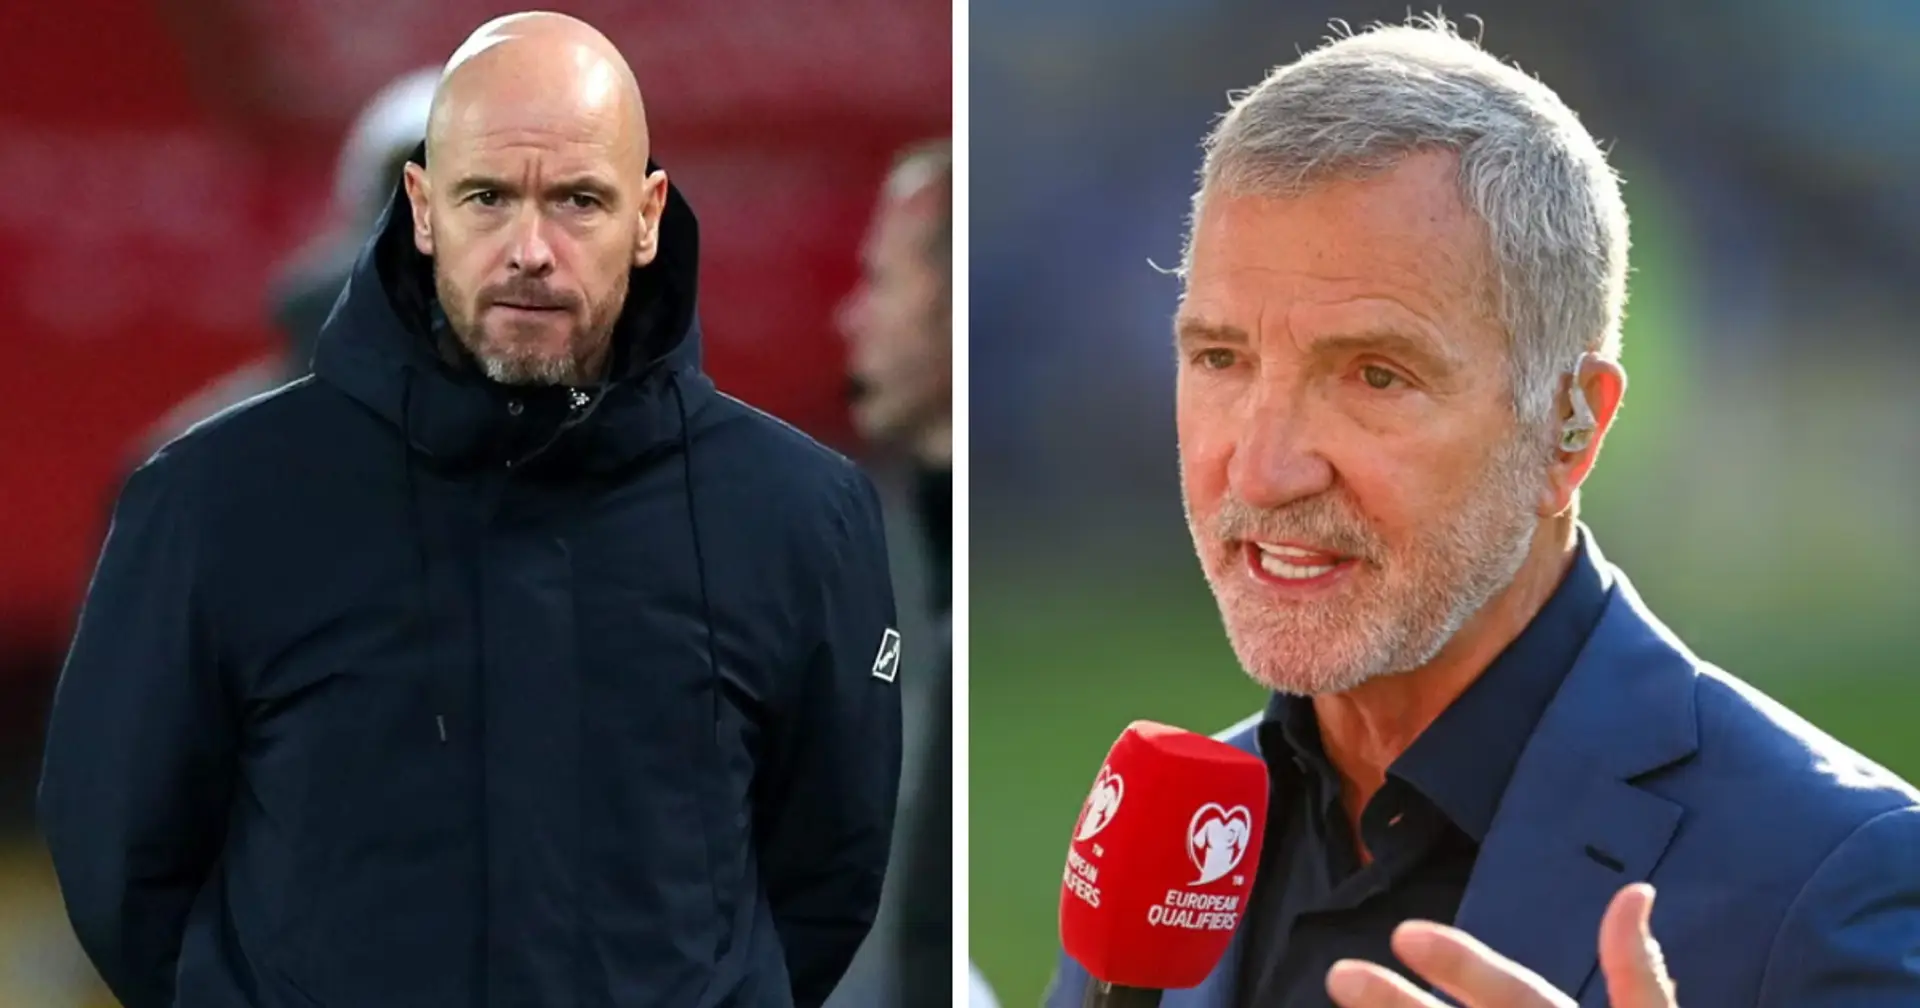 'They don't buy into his soft Dutch accent and ill-fitting suits': Souness on why Man United players may not like Ten Hag